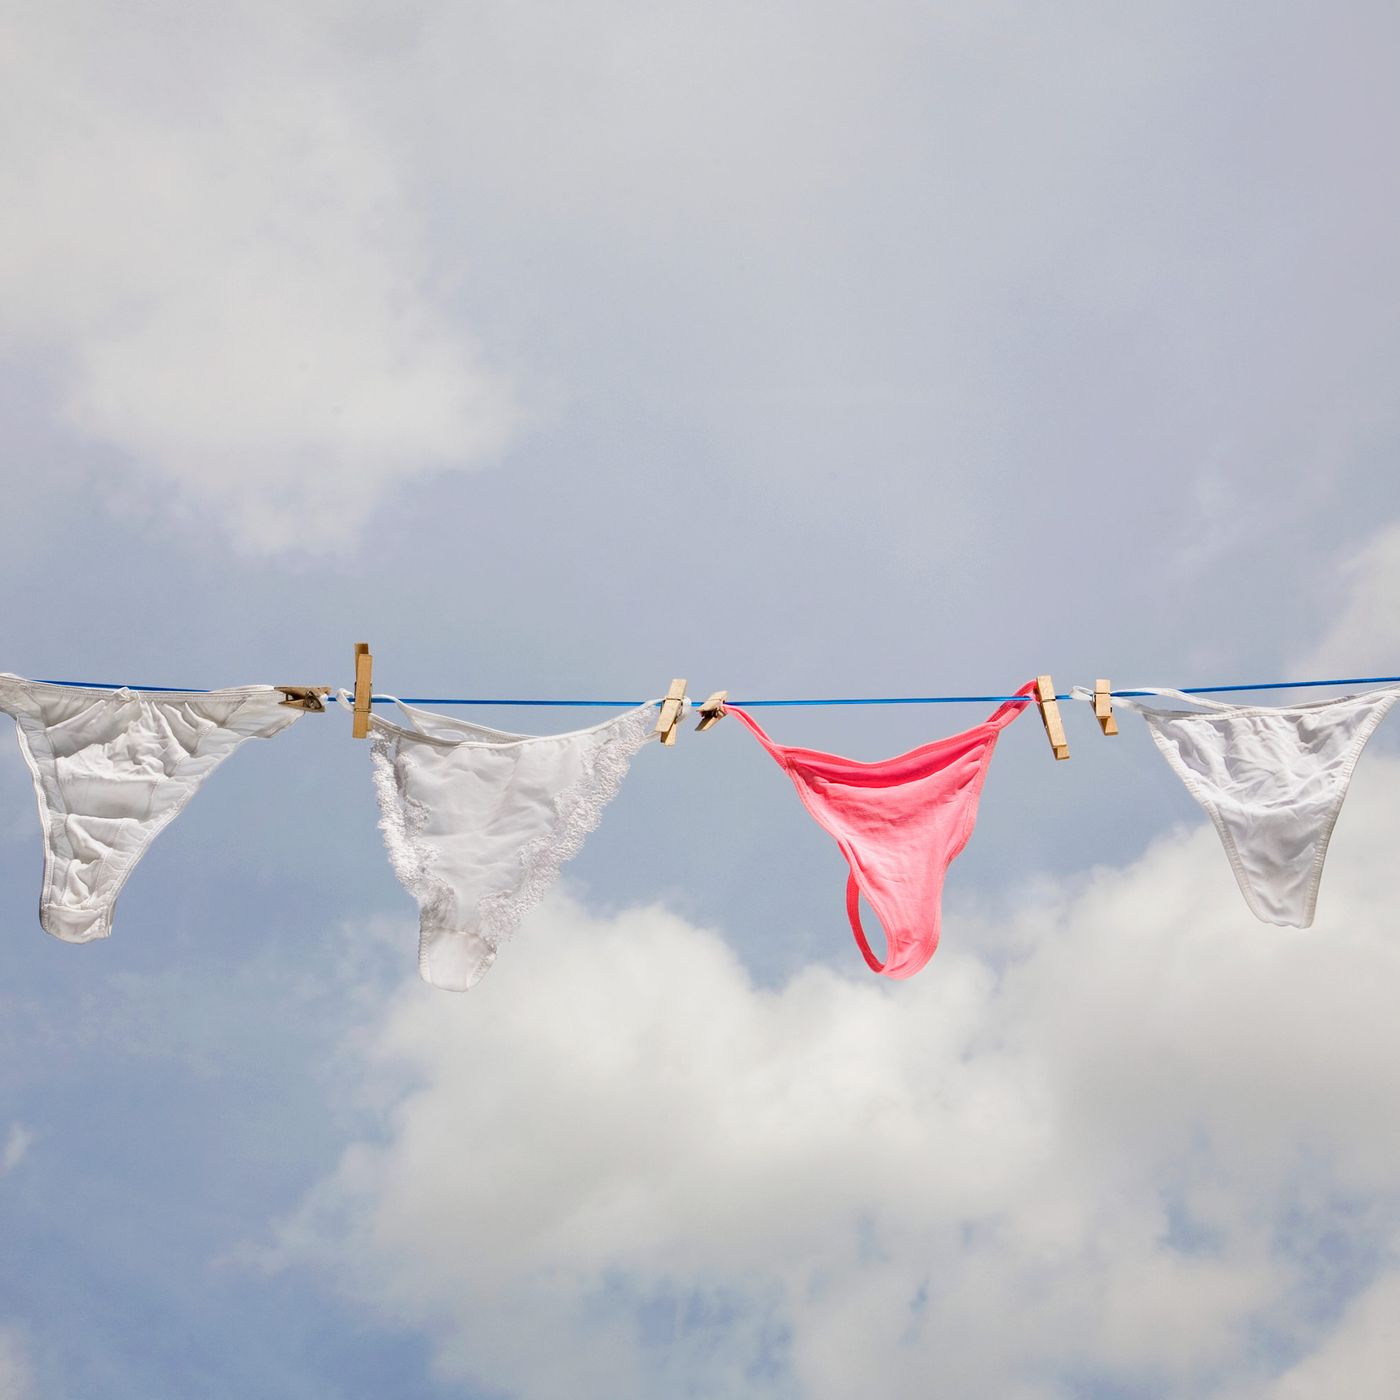 What's a good bra to wear with satin panties? - Quora